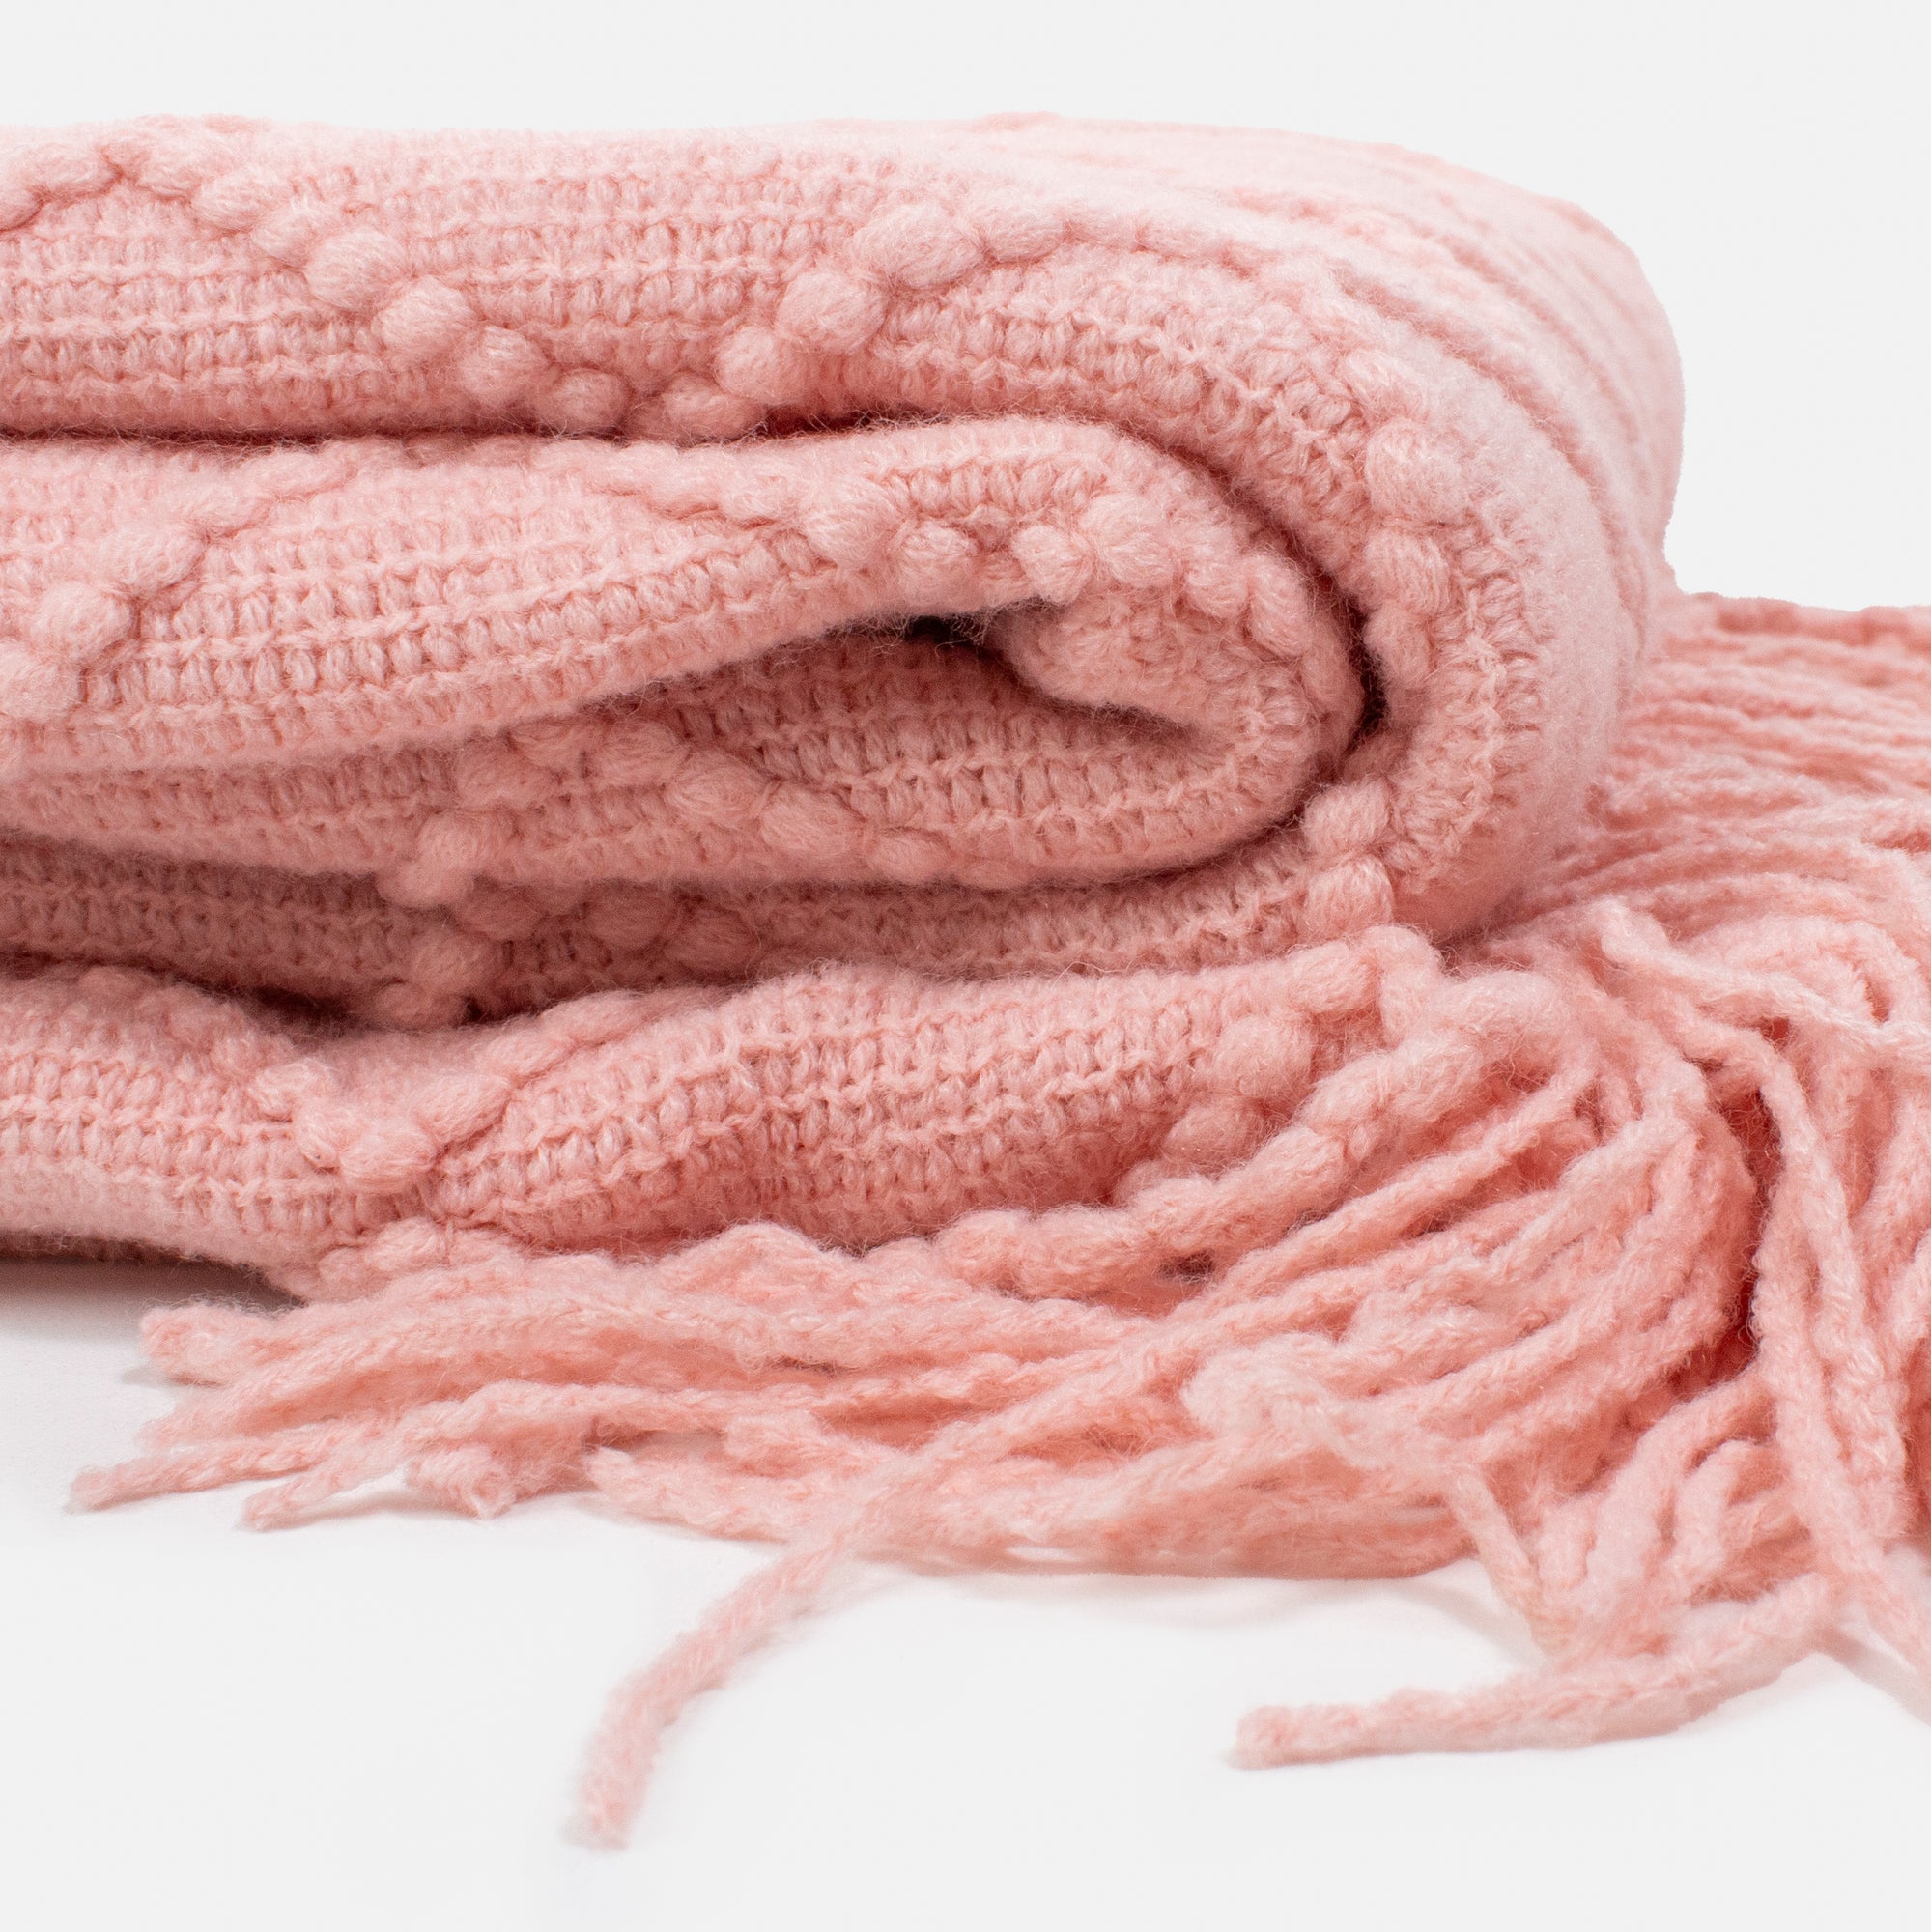 Pale pink blanket with diamond patterns and fringes